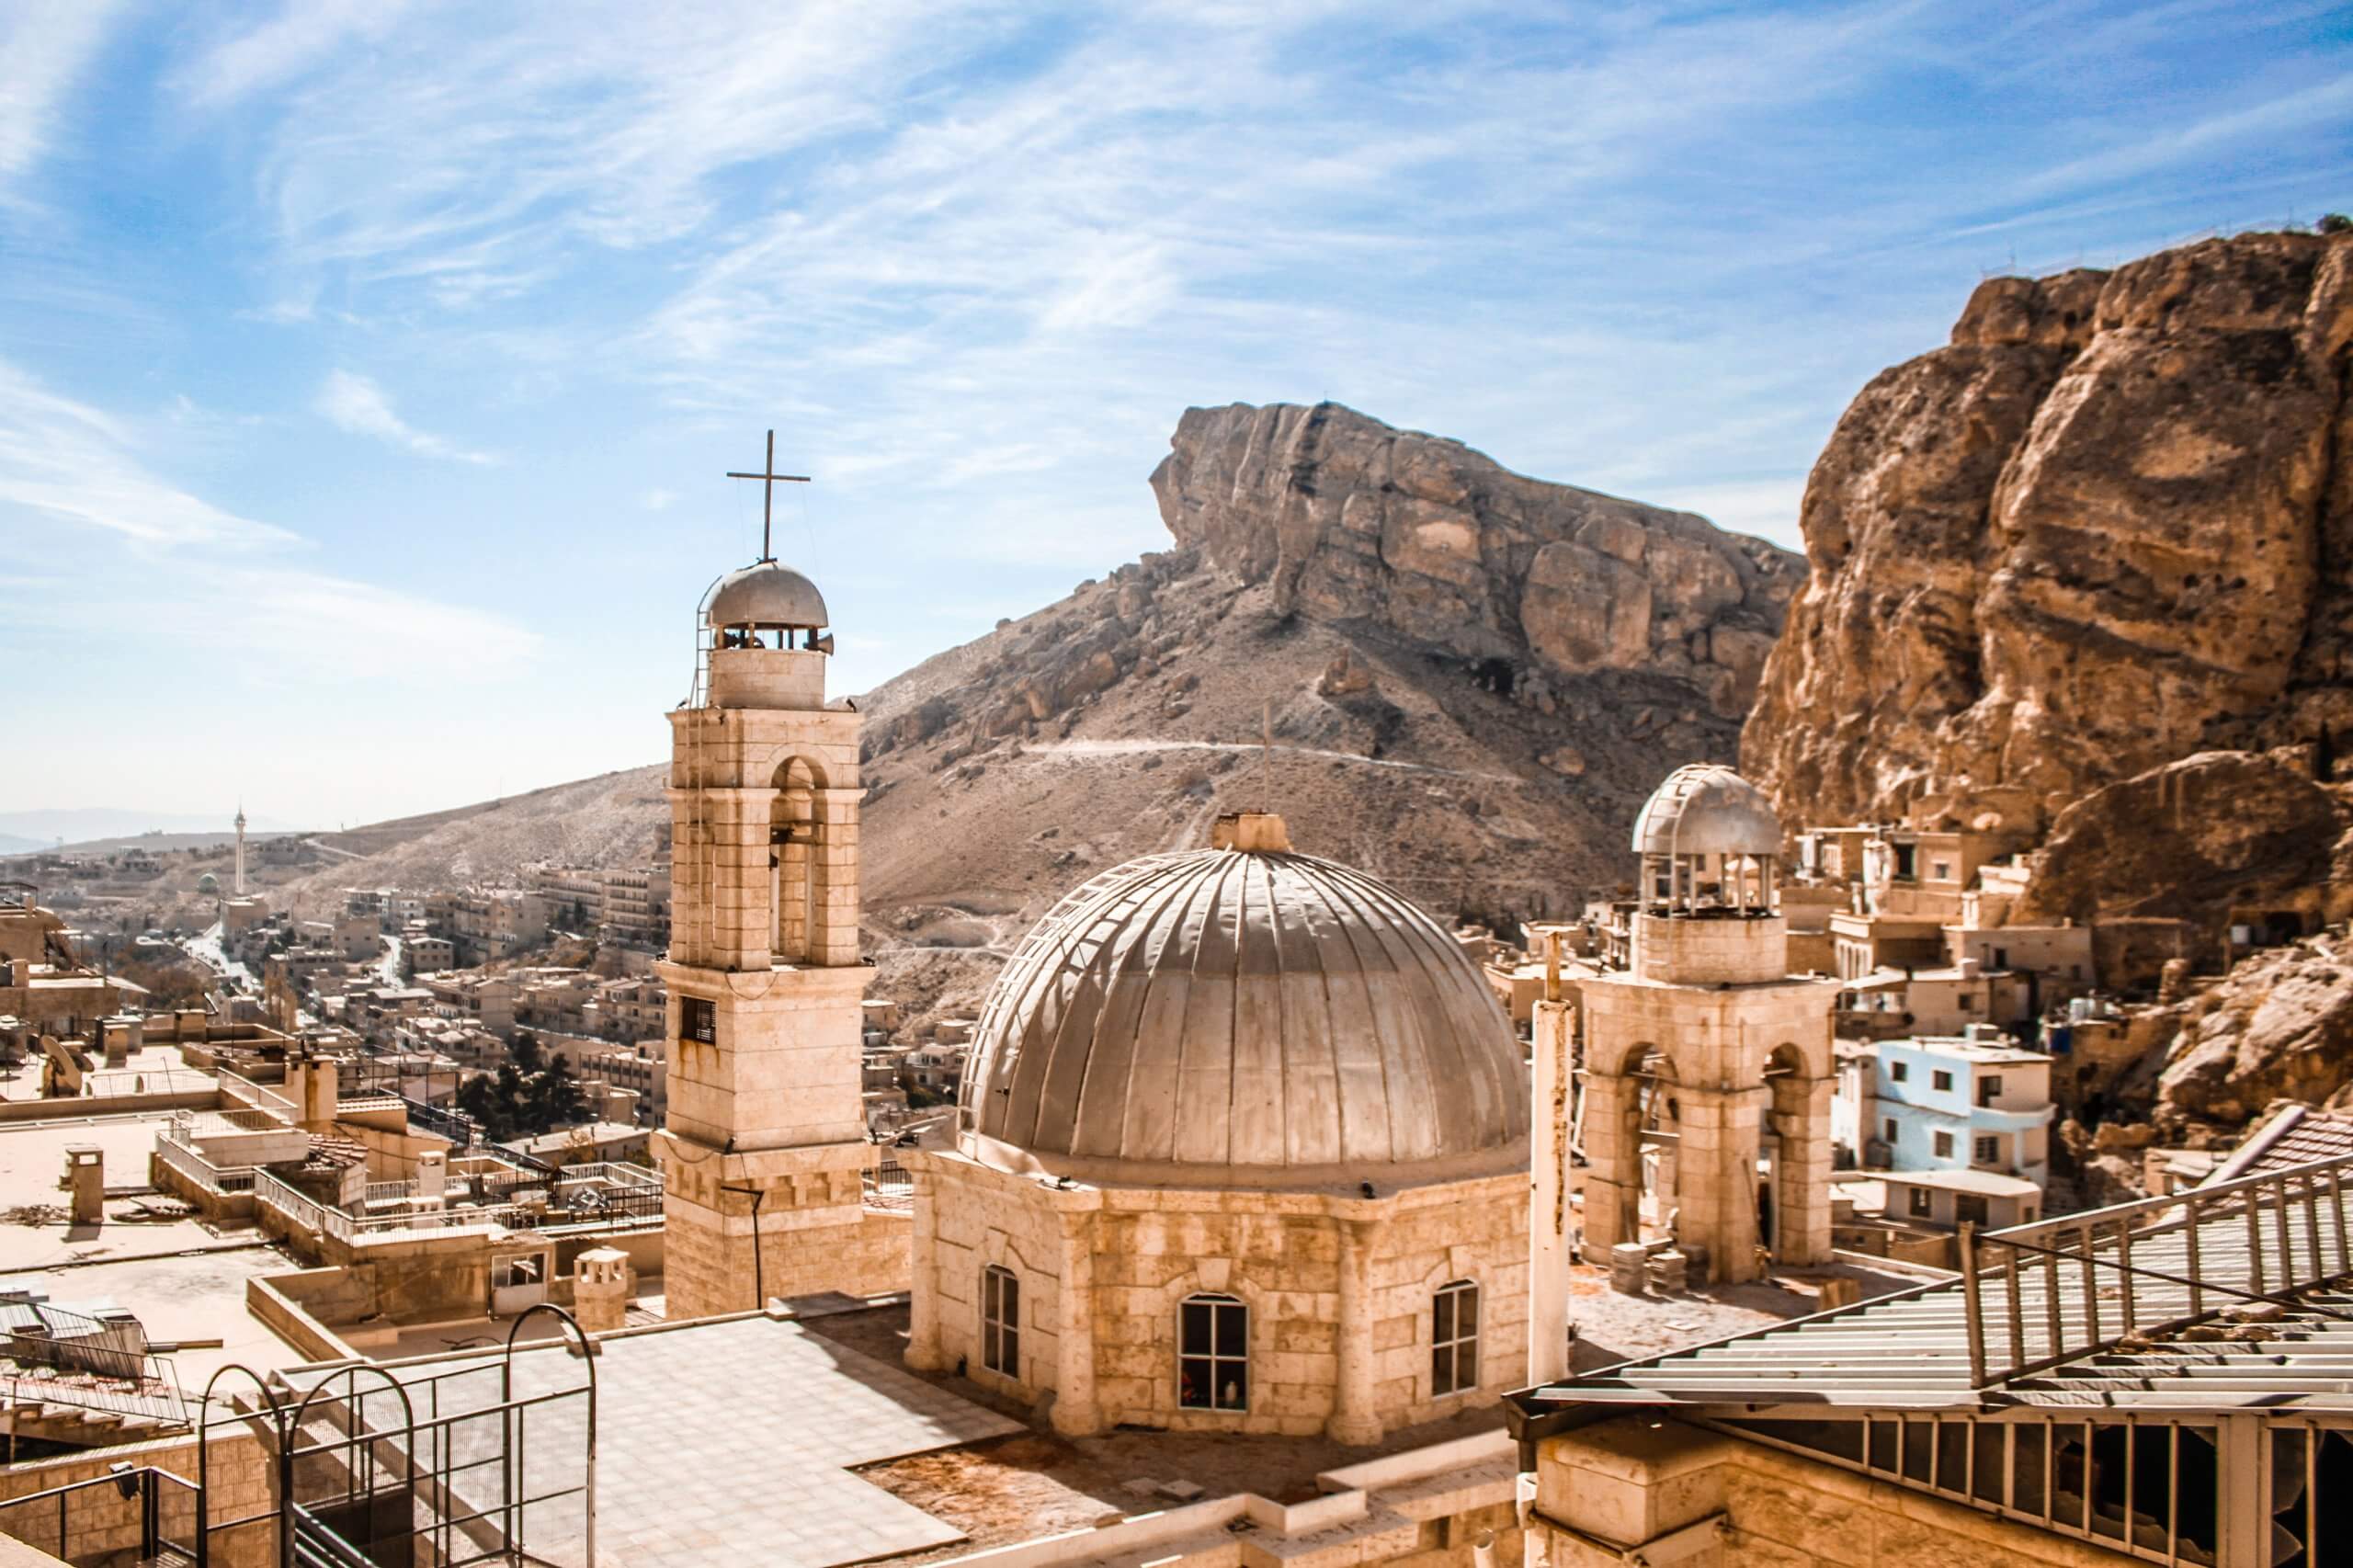 In Syria, the village of Maaloula falls into the hands of the Al-Nosra Front jihadists.